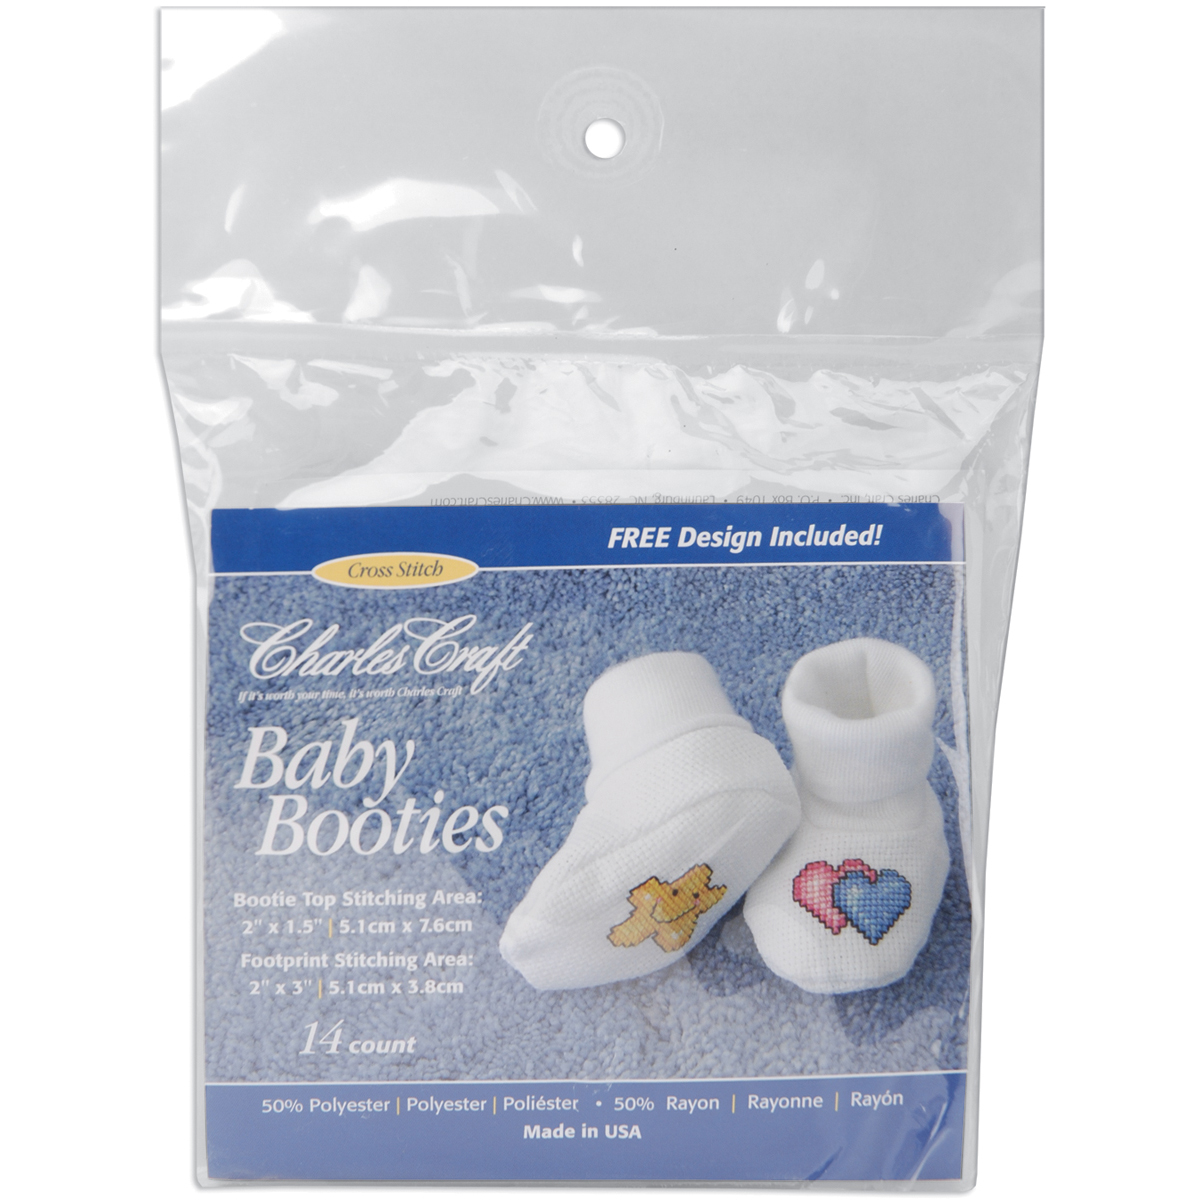 Charles Craft Baby Booties 14 Count-White - image 2 of 2